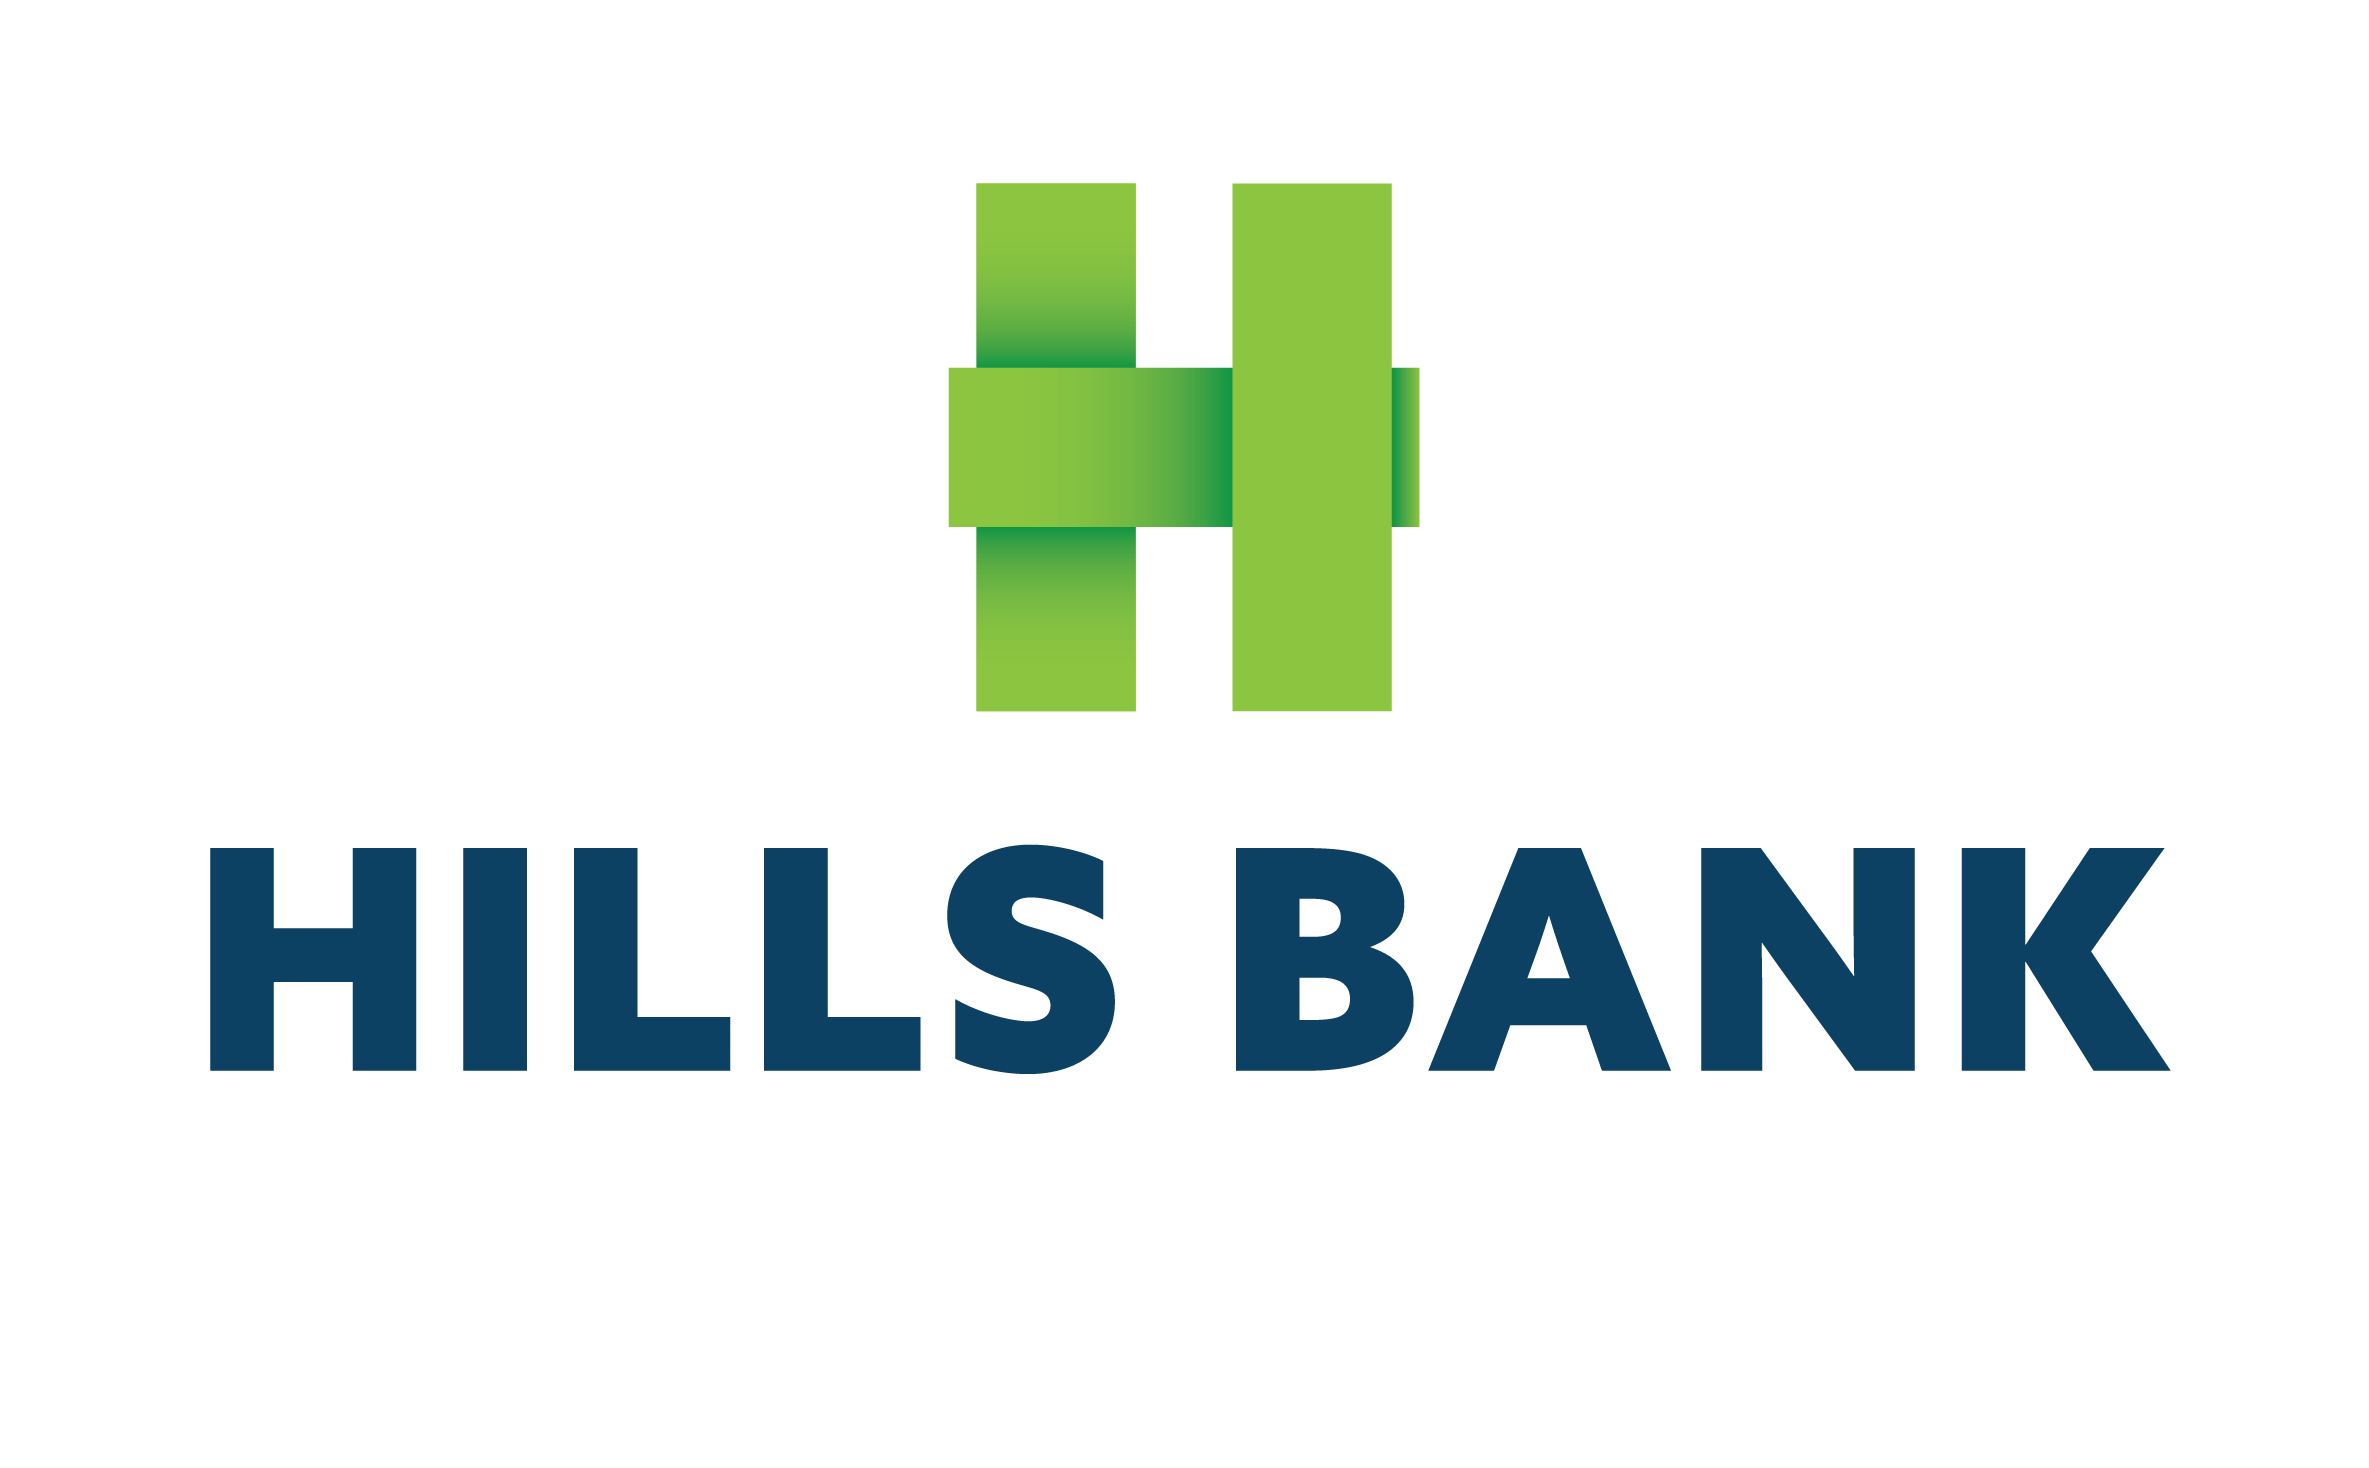 Hill Bank logo with a green H.